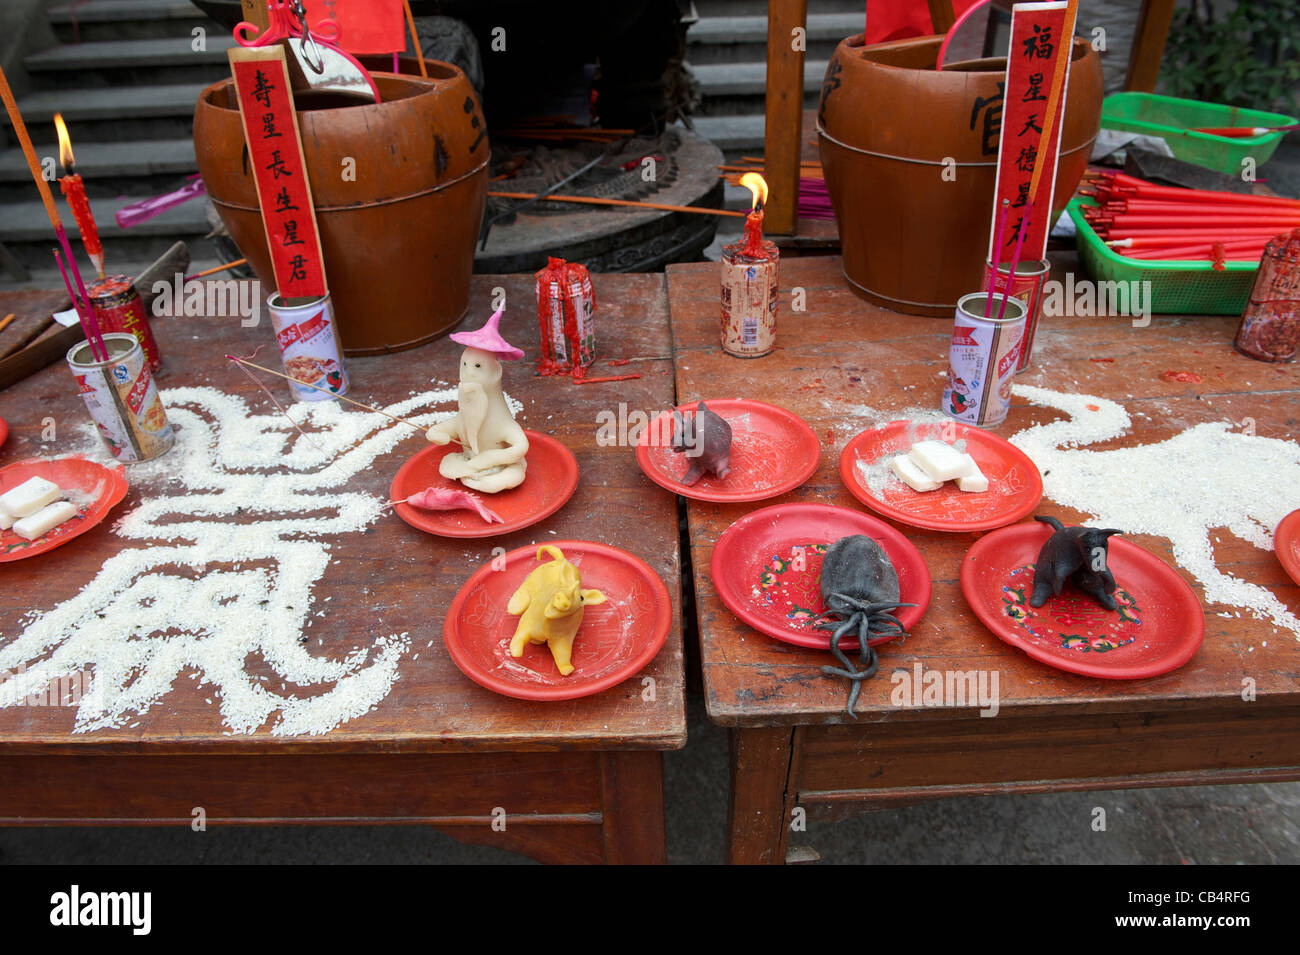 Sacrifices are offered during Xiayuan Festival in a Taoist temple in Taizhou, Zhejiang, China. 11-Nov-2011 Stock Photo